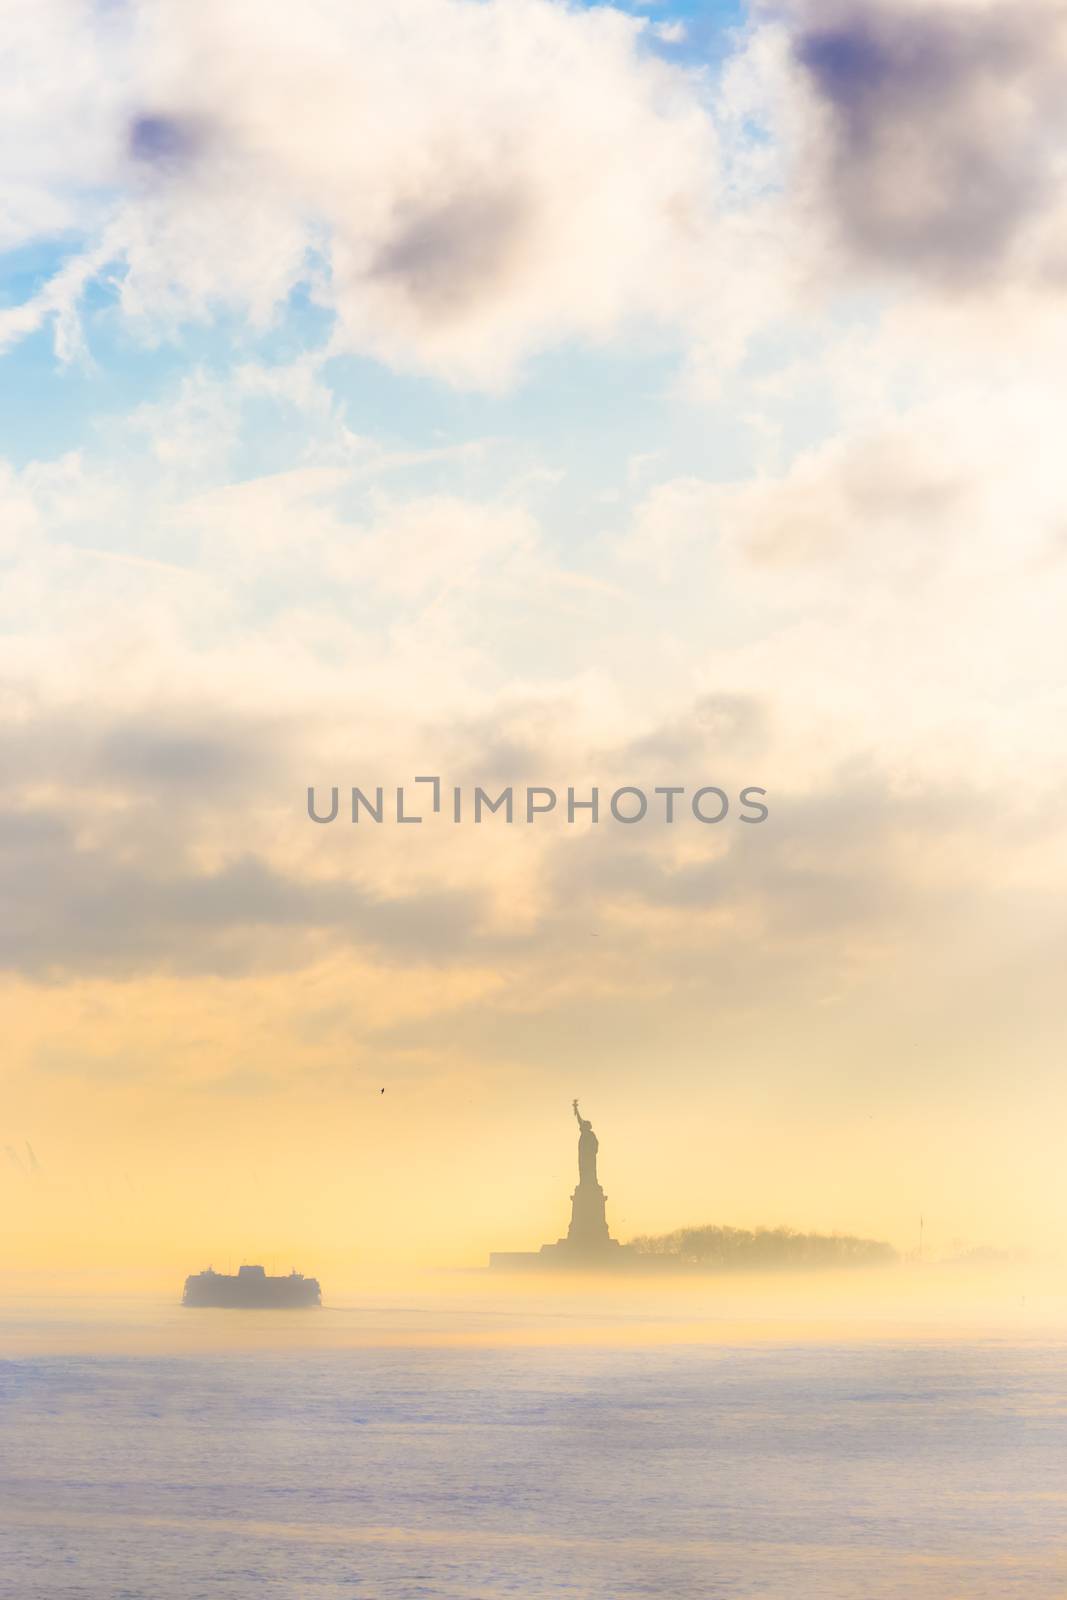 Staten Island Ferry cruises past the Statue of Liberty. by kasto